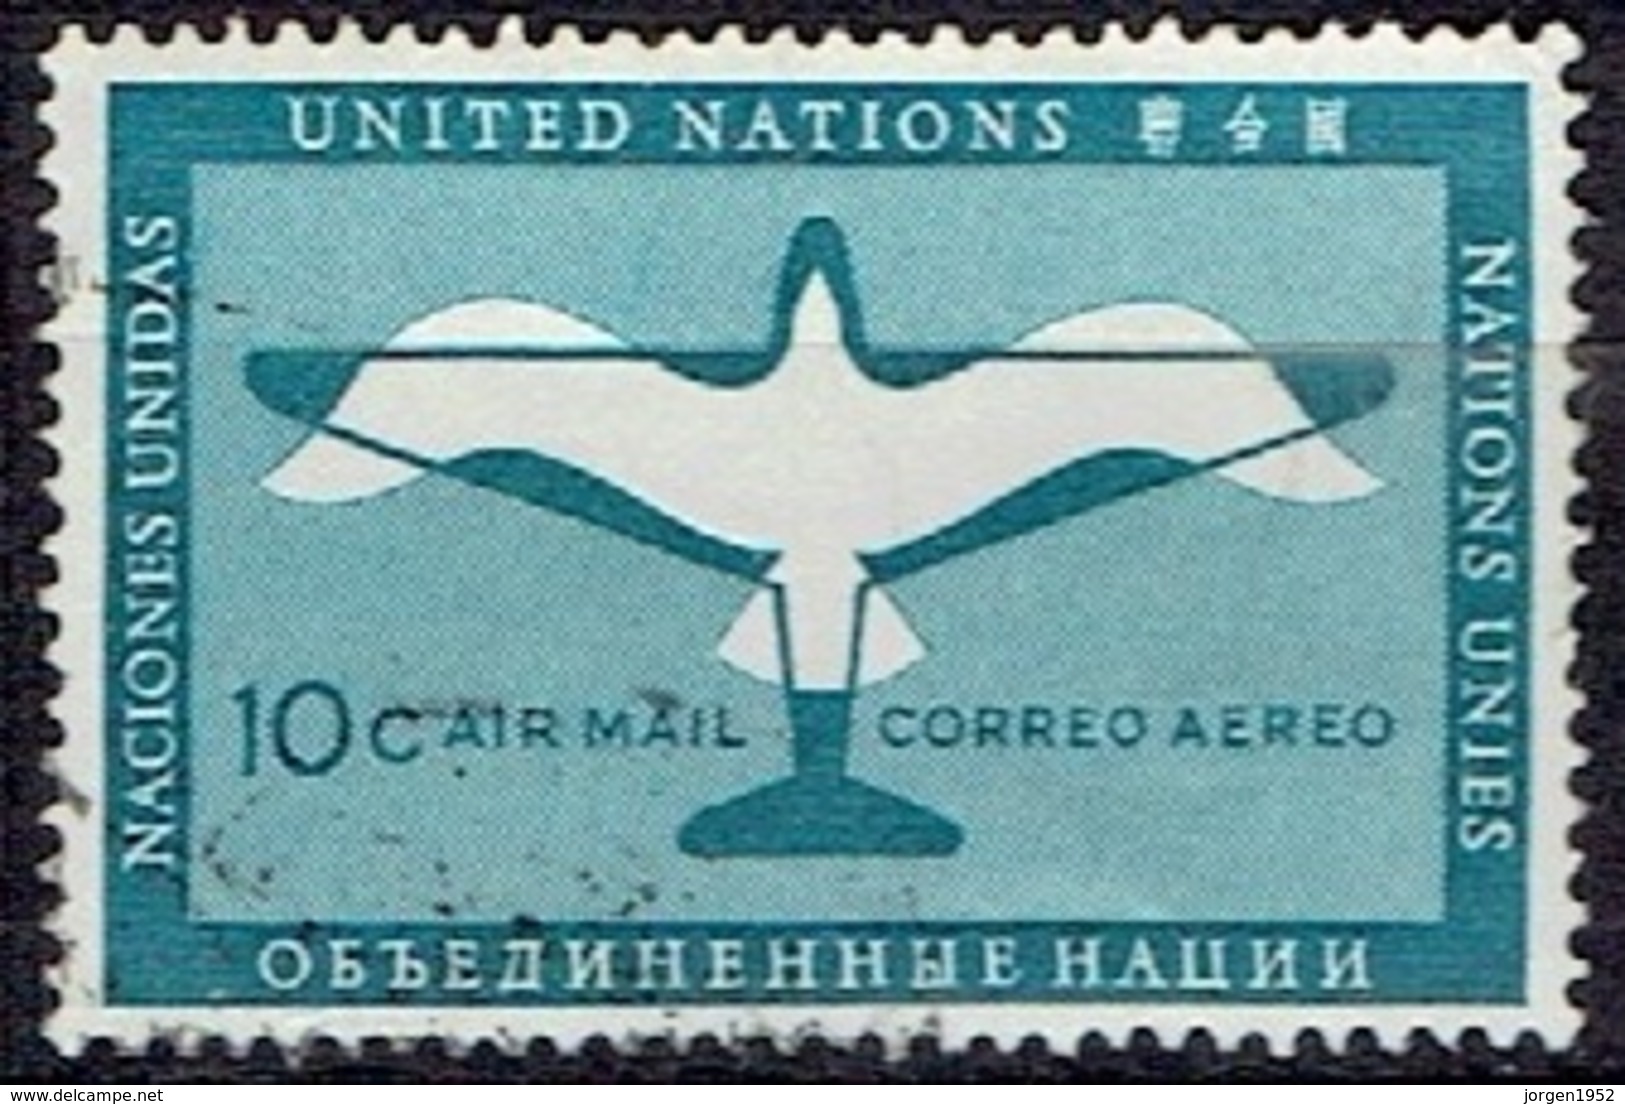 UNITED NATIONS # NEW YORK FROM 1951 STAMPWORLD 13 - Oblitérés